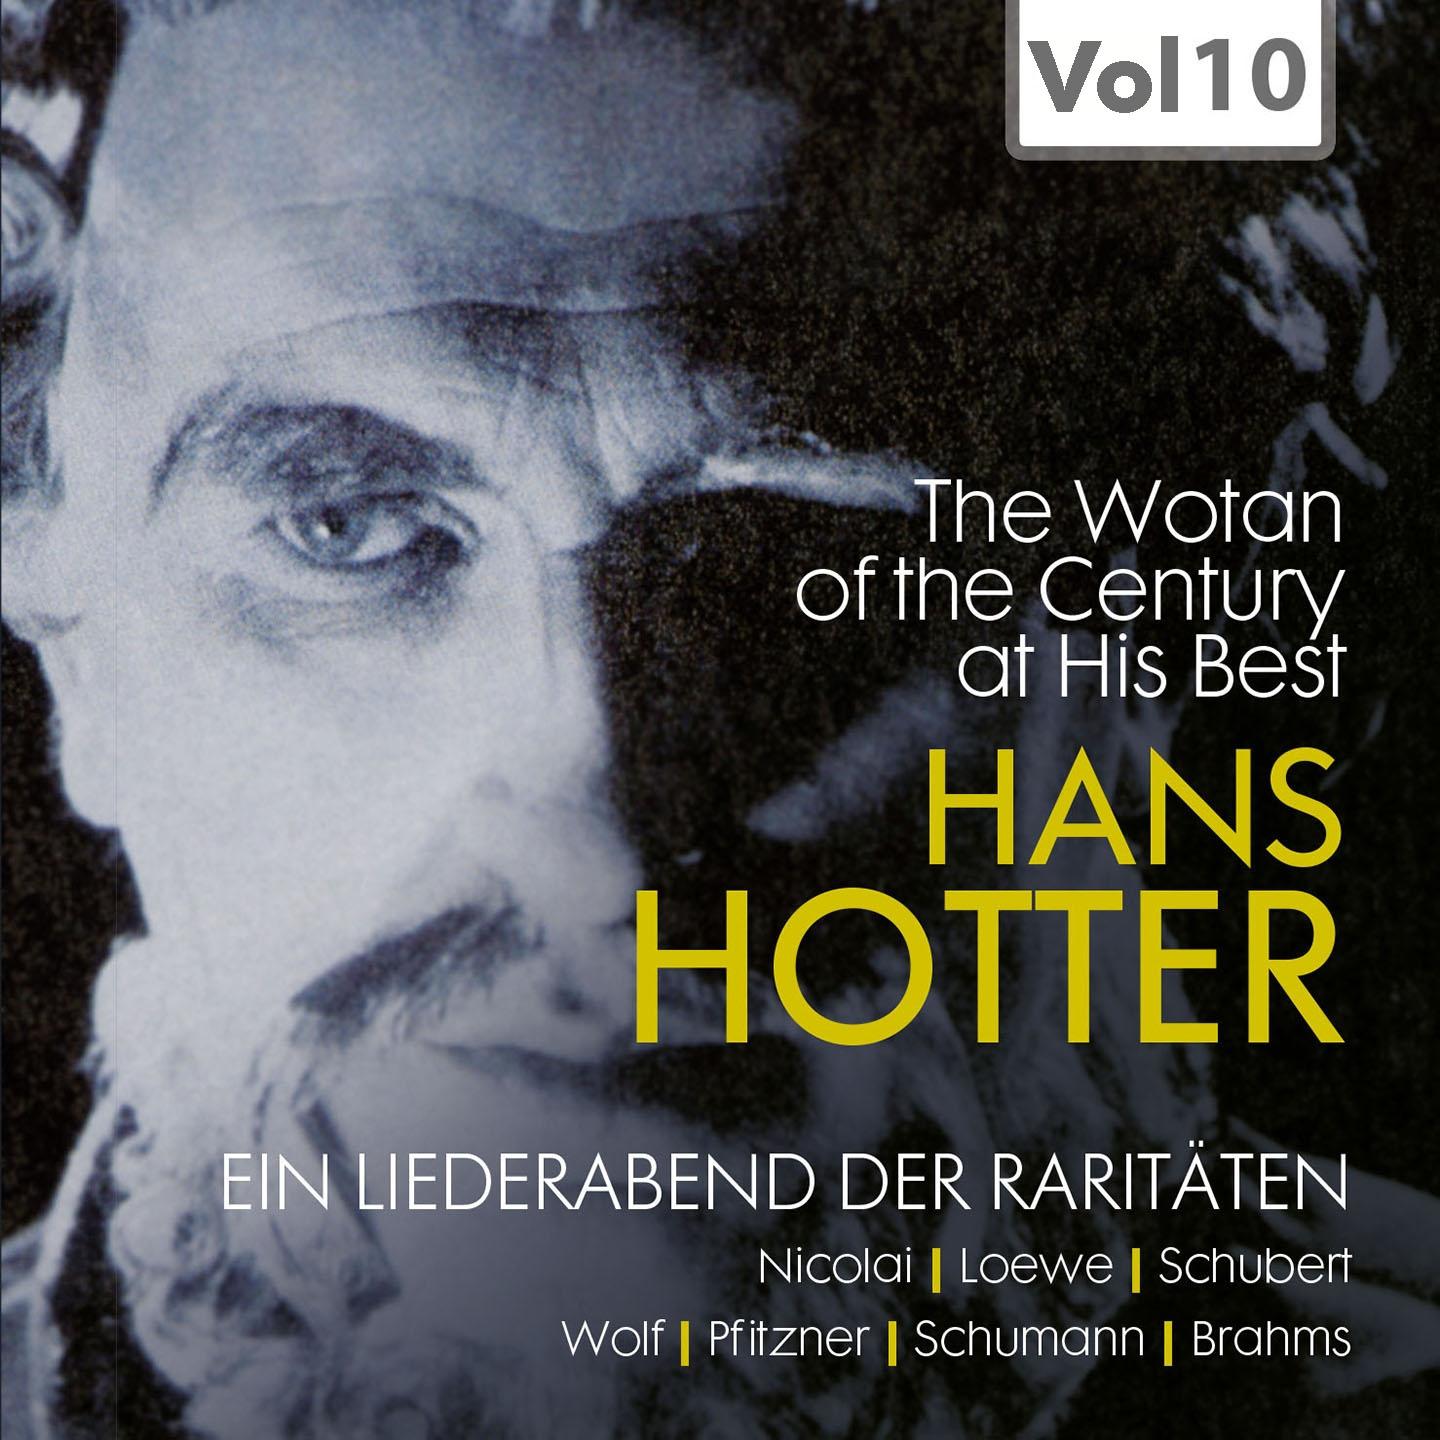 Постер альбома Hans Hotter "The Wotan of the Century" at His Best, Vol. 10